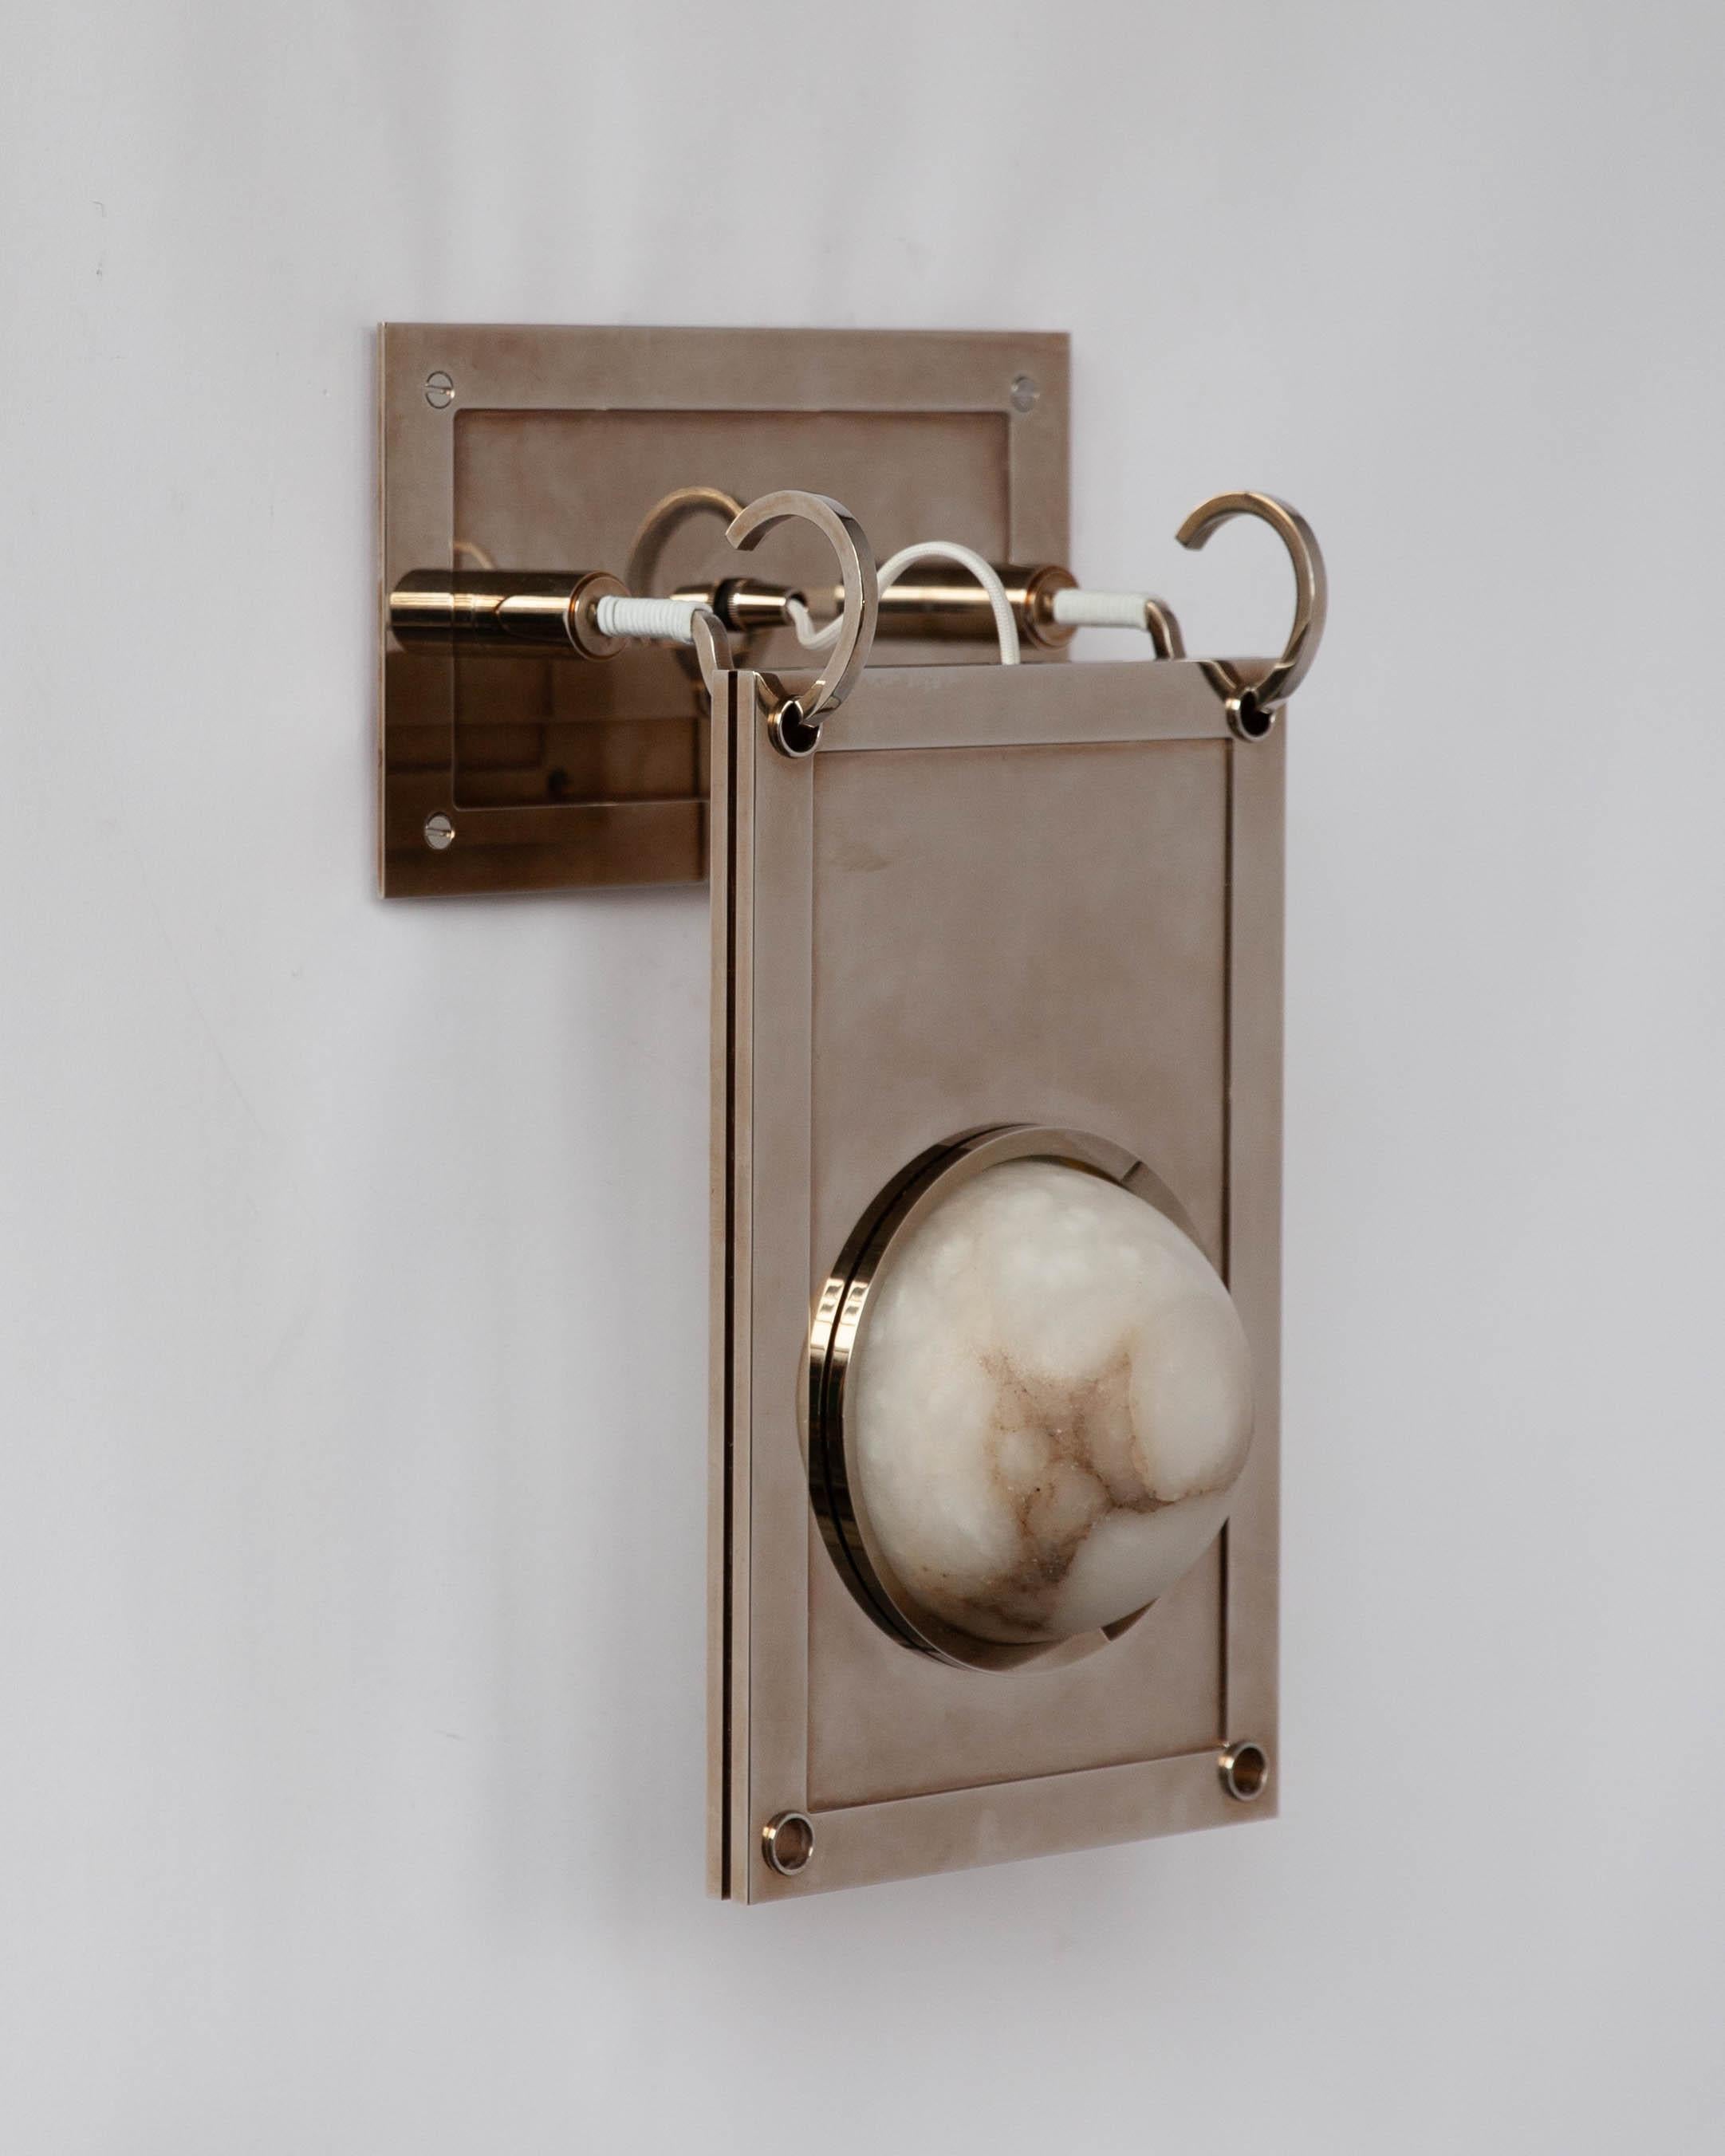 MWL4510 
A wall sconce made of a hand-carved, veined white alabaster globe lens, set in a solid slab of machined brass with threaded porthole bezels. The stone is illuminated by integrated warm-dim LED lamping and the body hangs from leather-wrapped